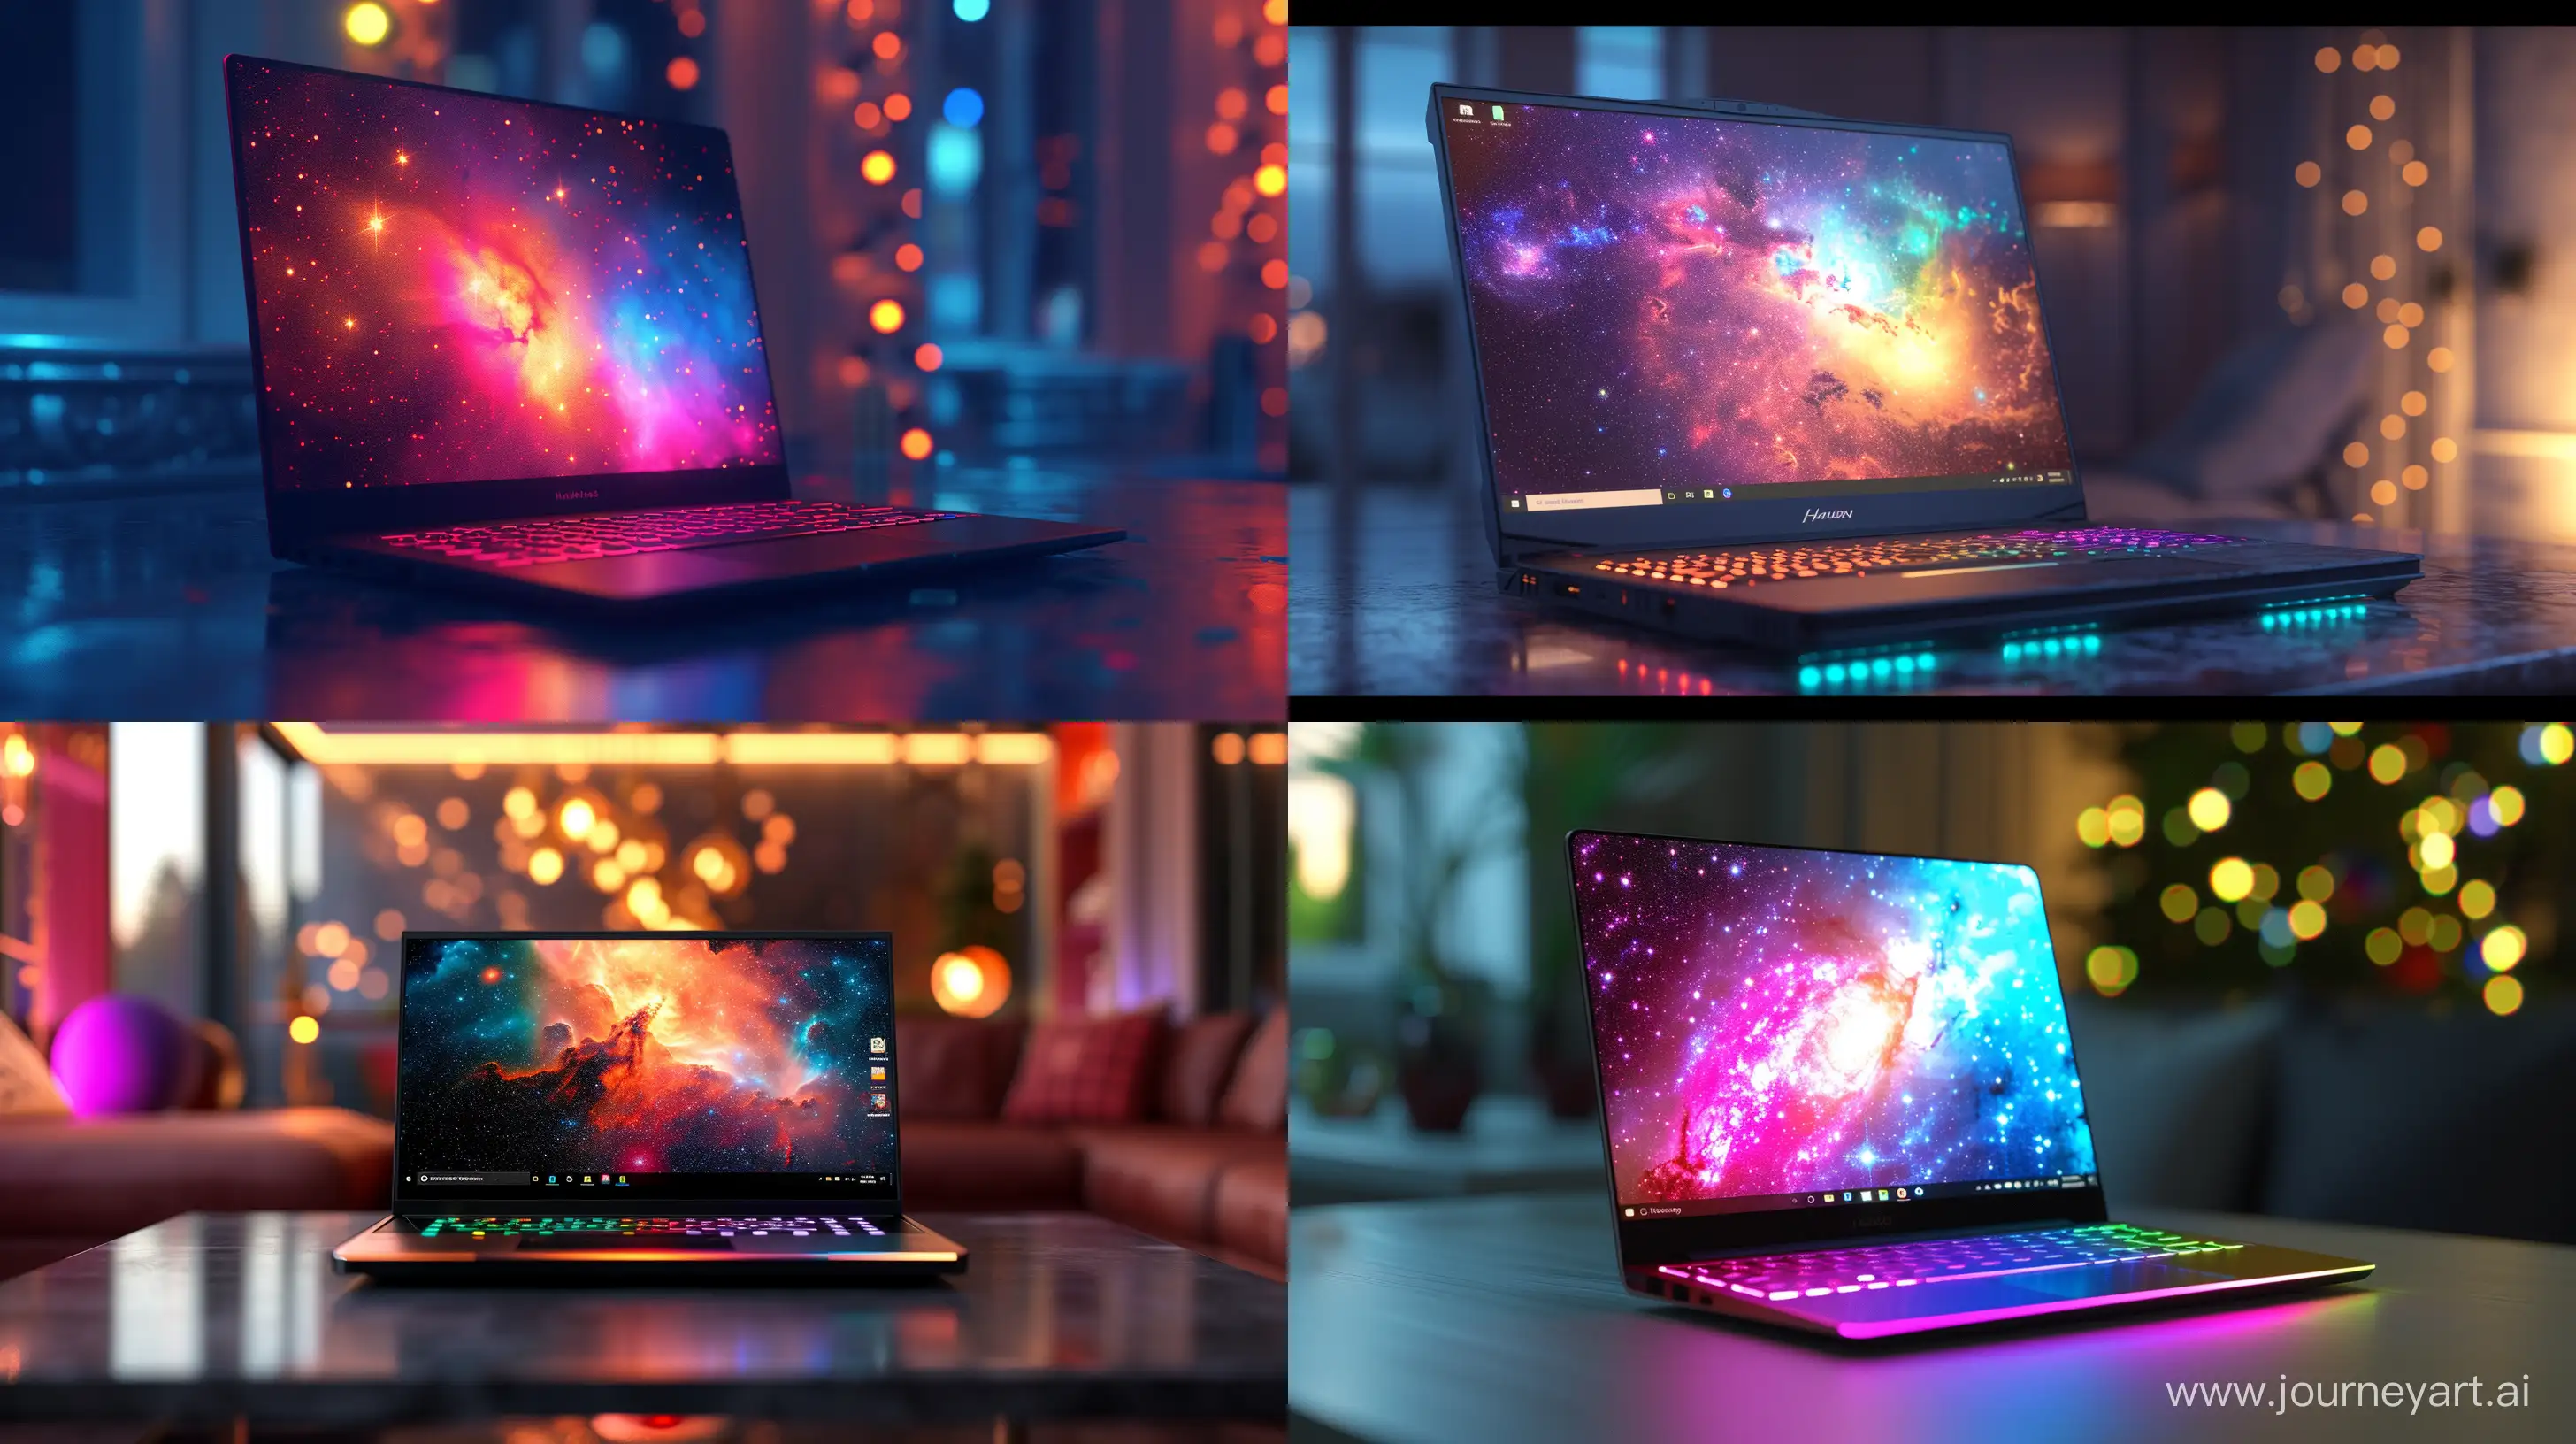 Romantic-Space-Programming-Haunting-Galaxy-Laptop-Illuminates-Table-with-Ultra-Realistic-Details-and-Cinematic-Lighting